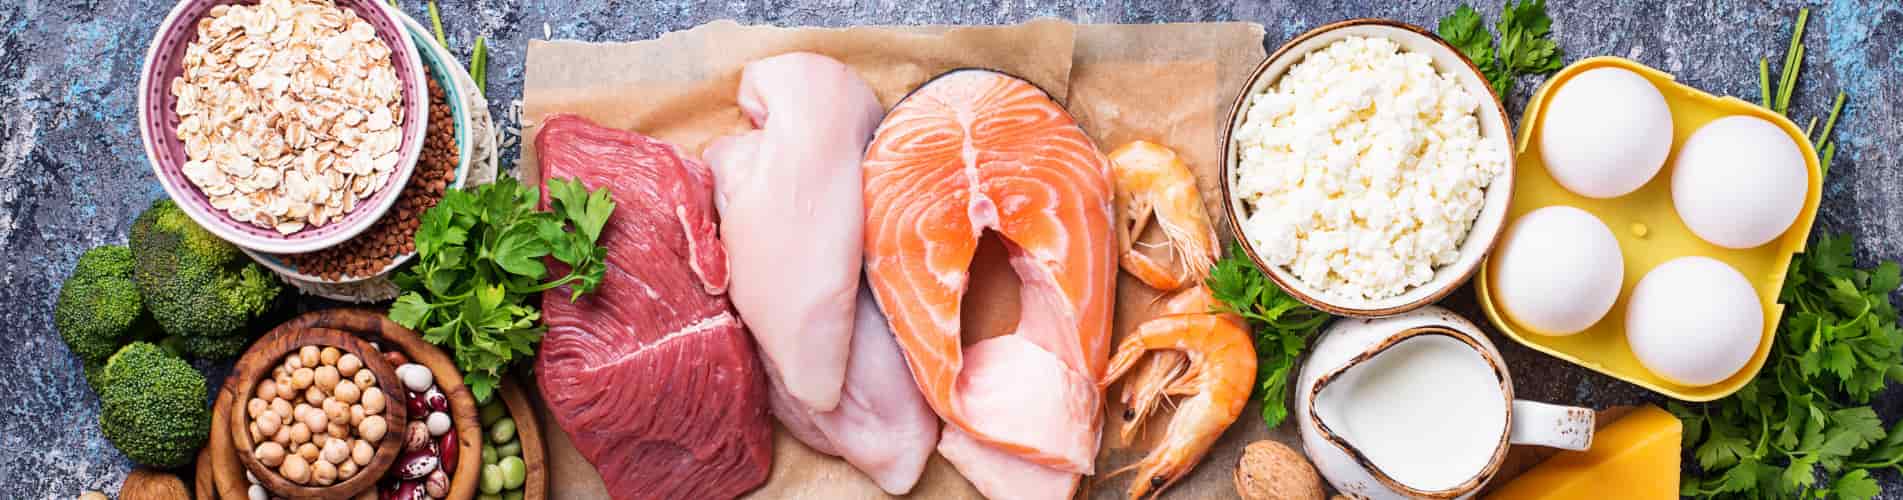 The Importance Of Protein In Your Diet